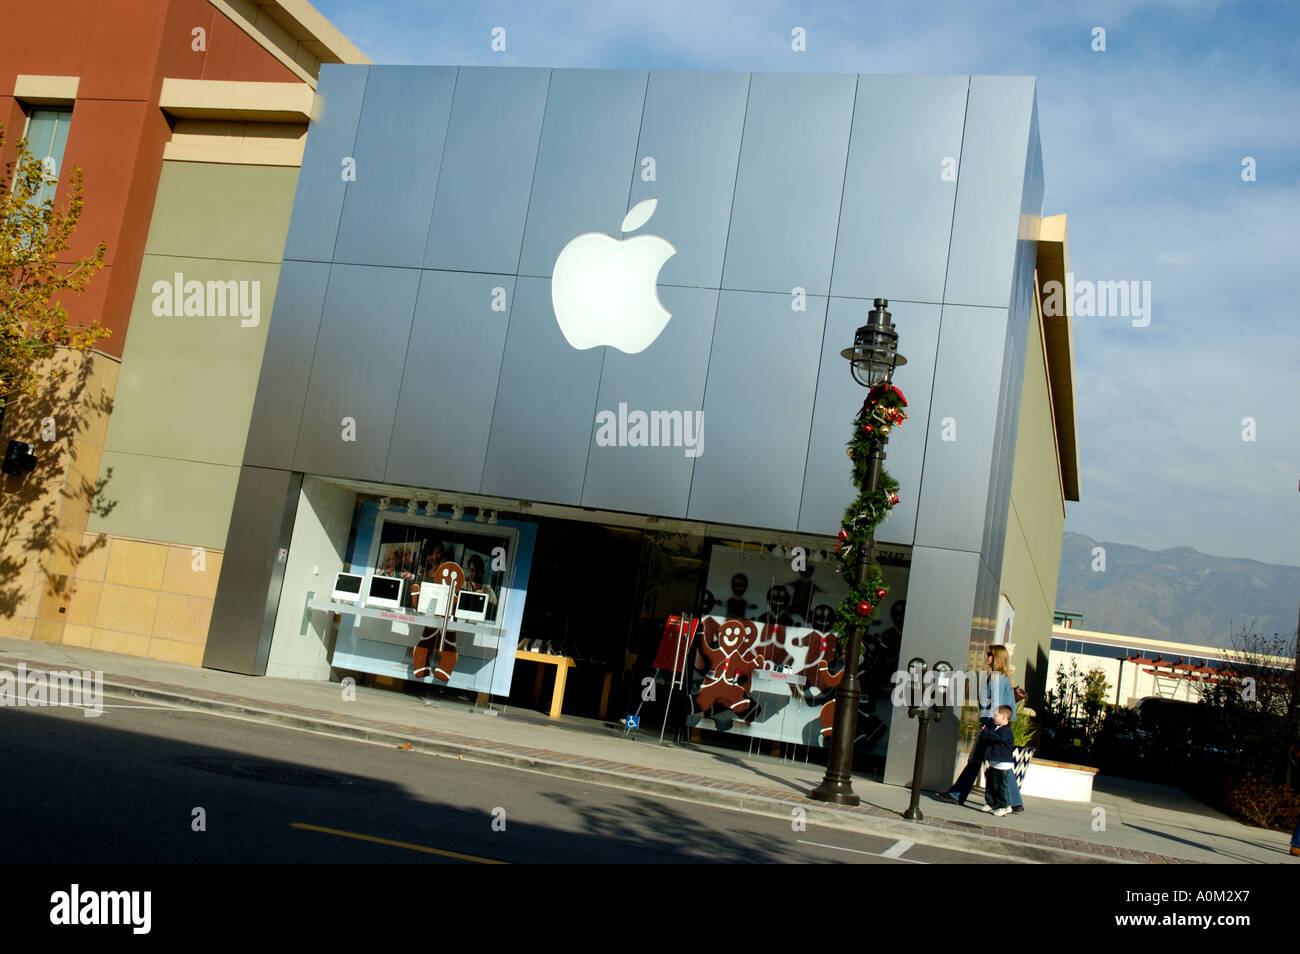 Apple Store Facade With Christmas Decorations Lamppost Next To It